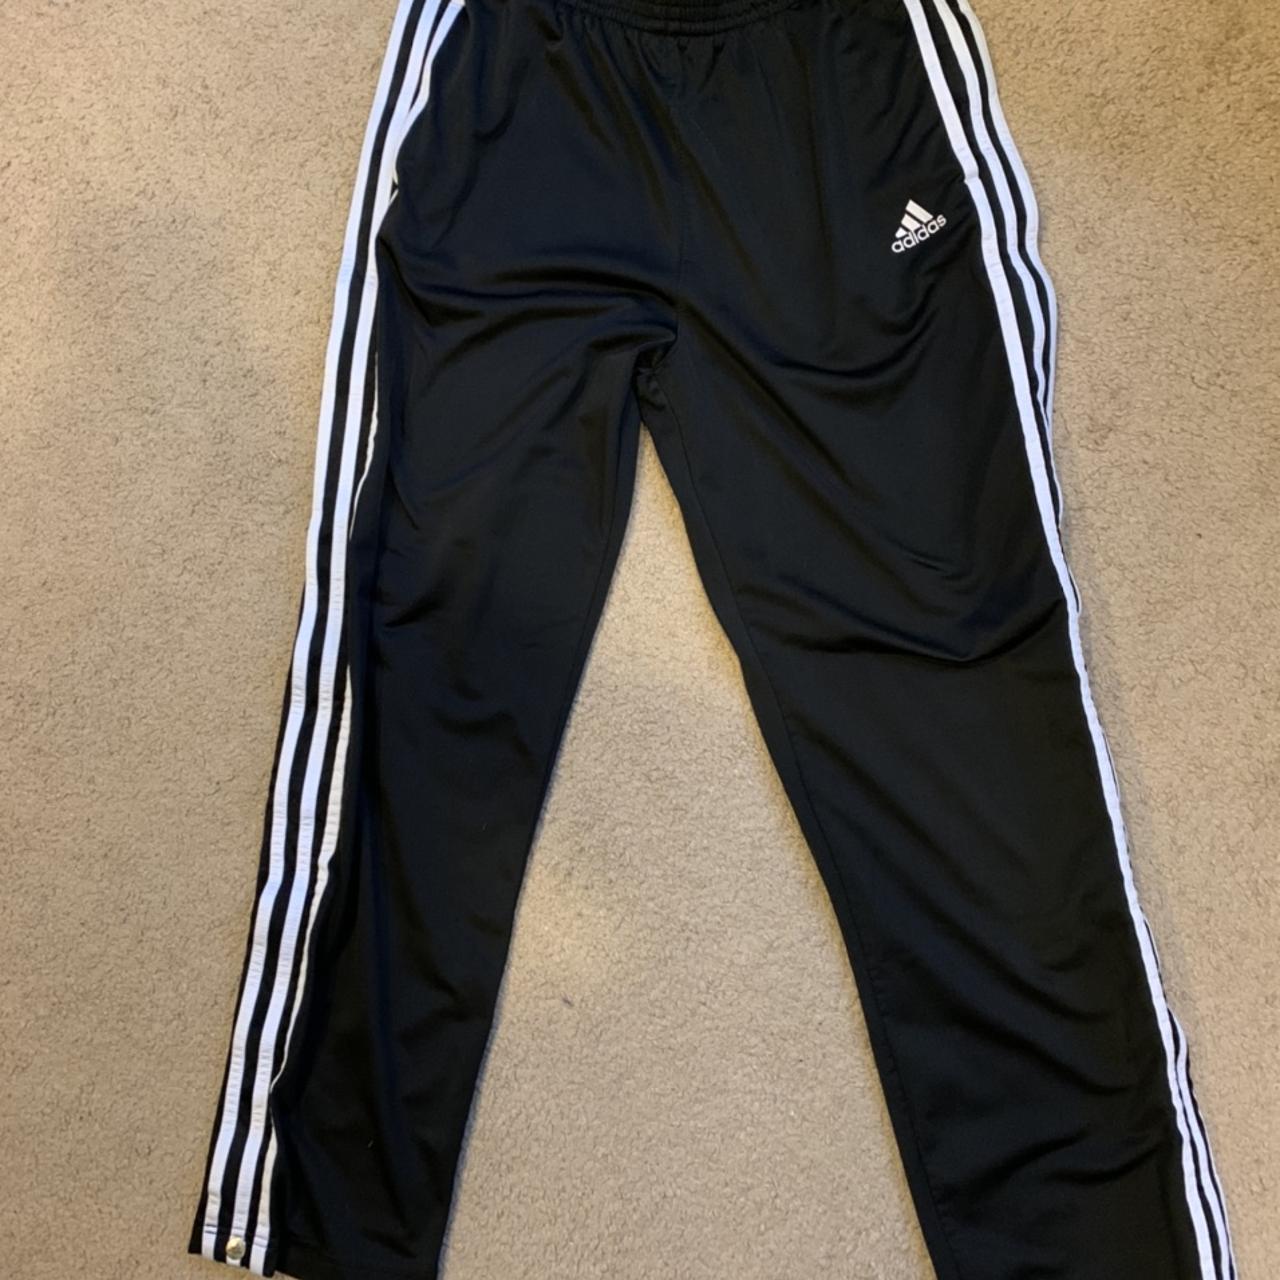 90s Adidas tearaway pants. Thick, heavy, soft... - Depop